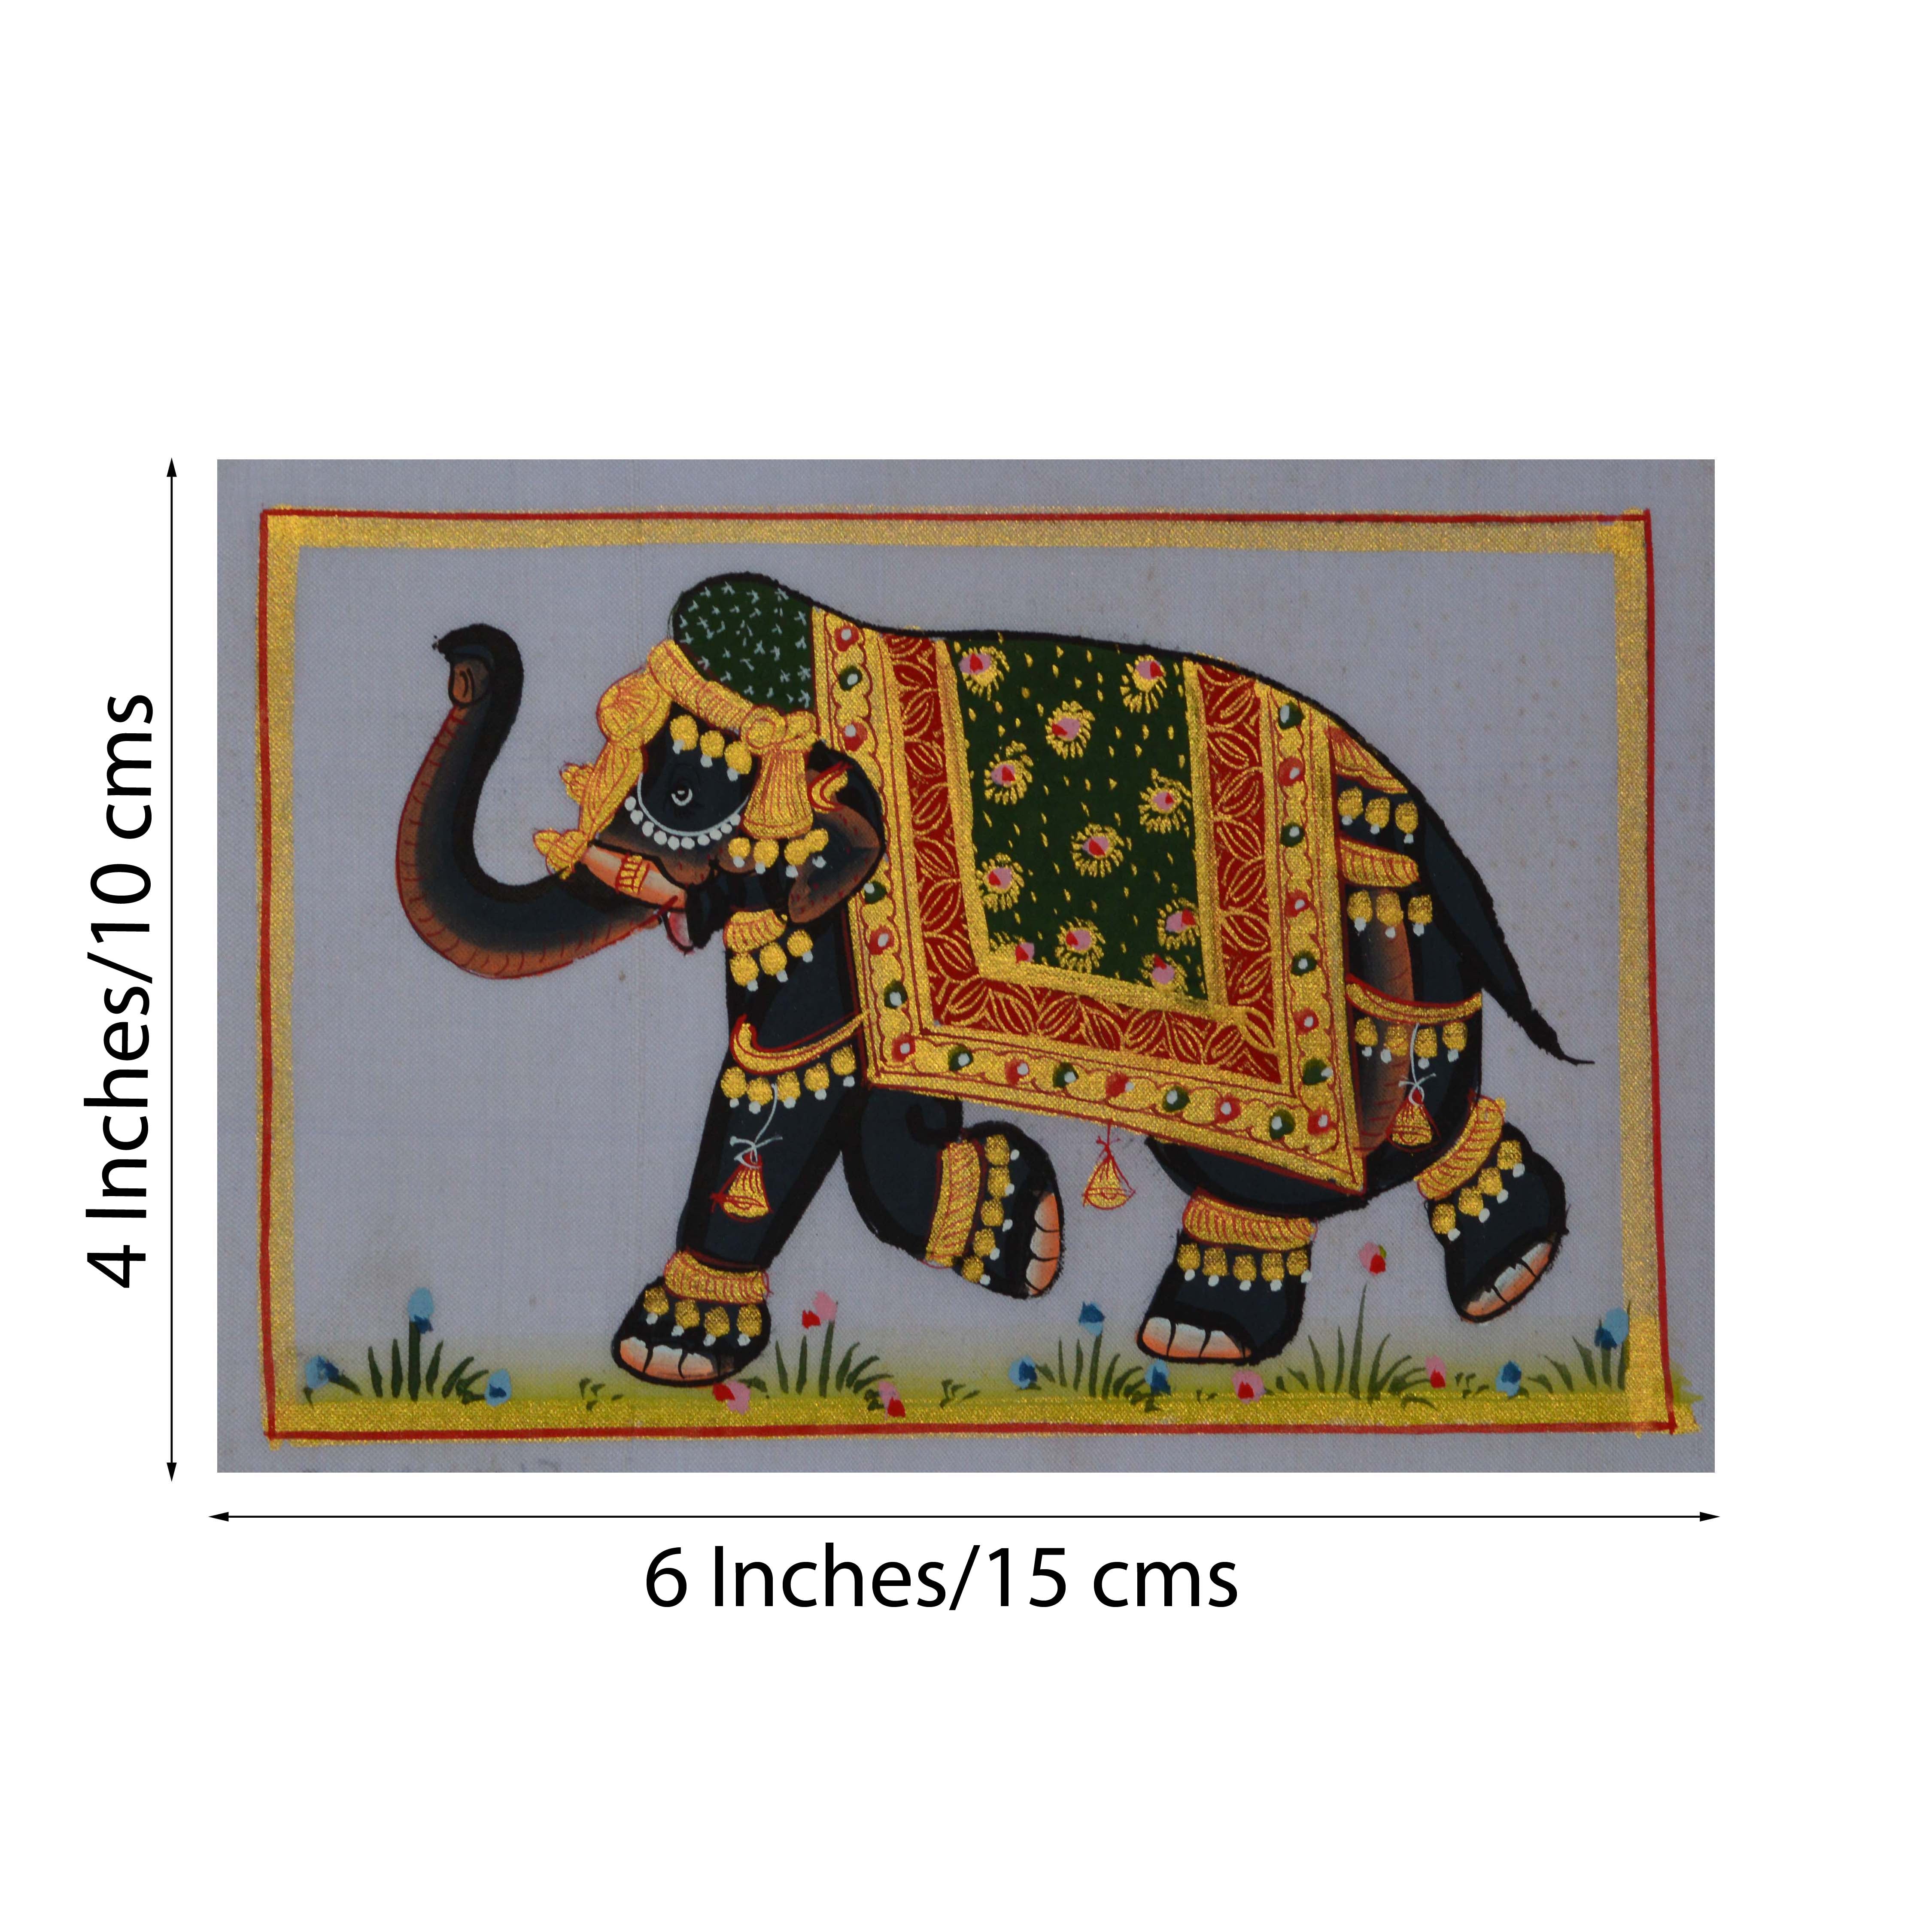 Royal Elephant decorated with Gold Ornaments on Canvas Original Art Silk Painting 1